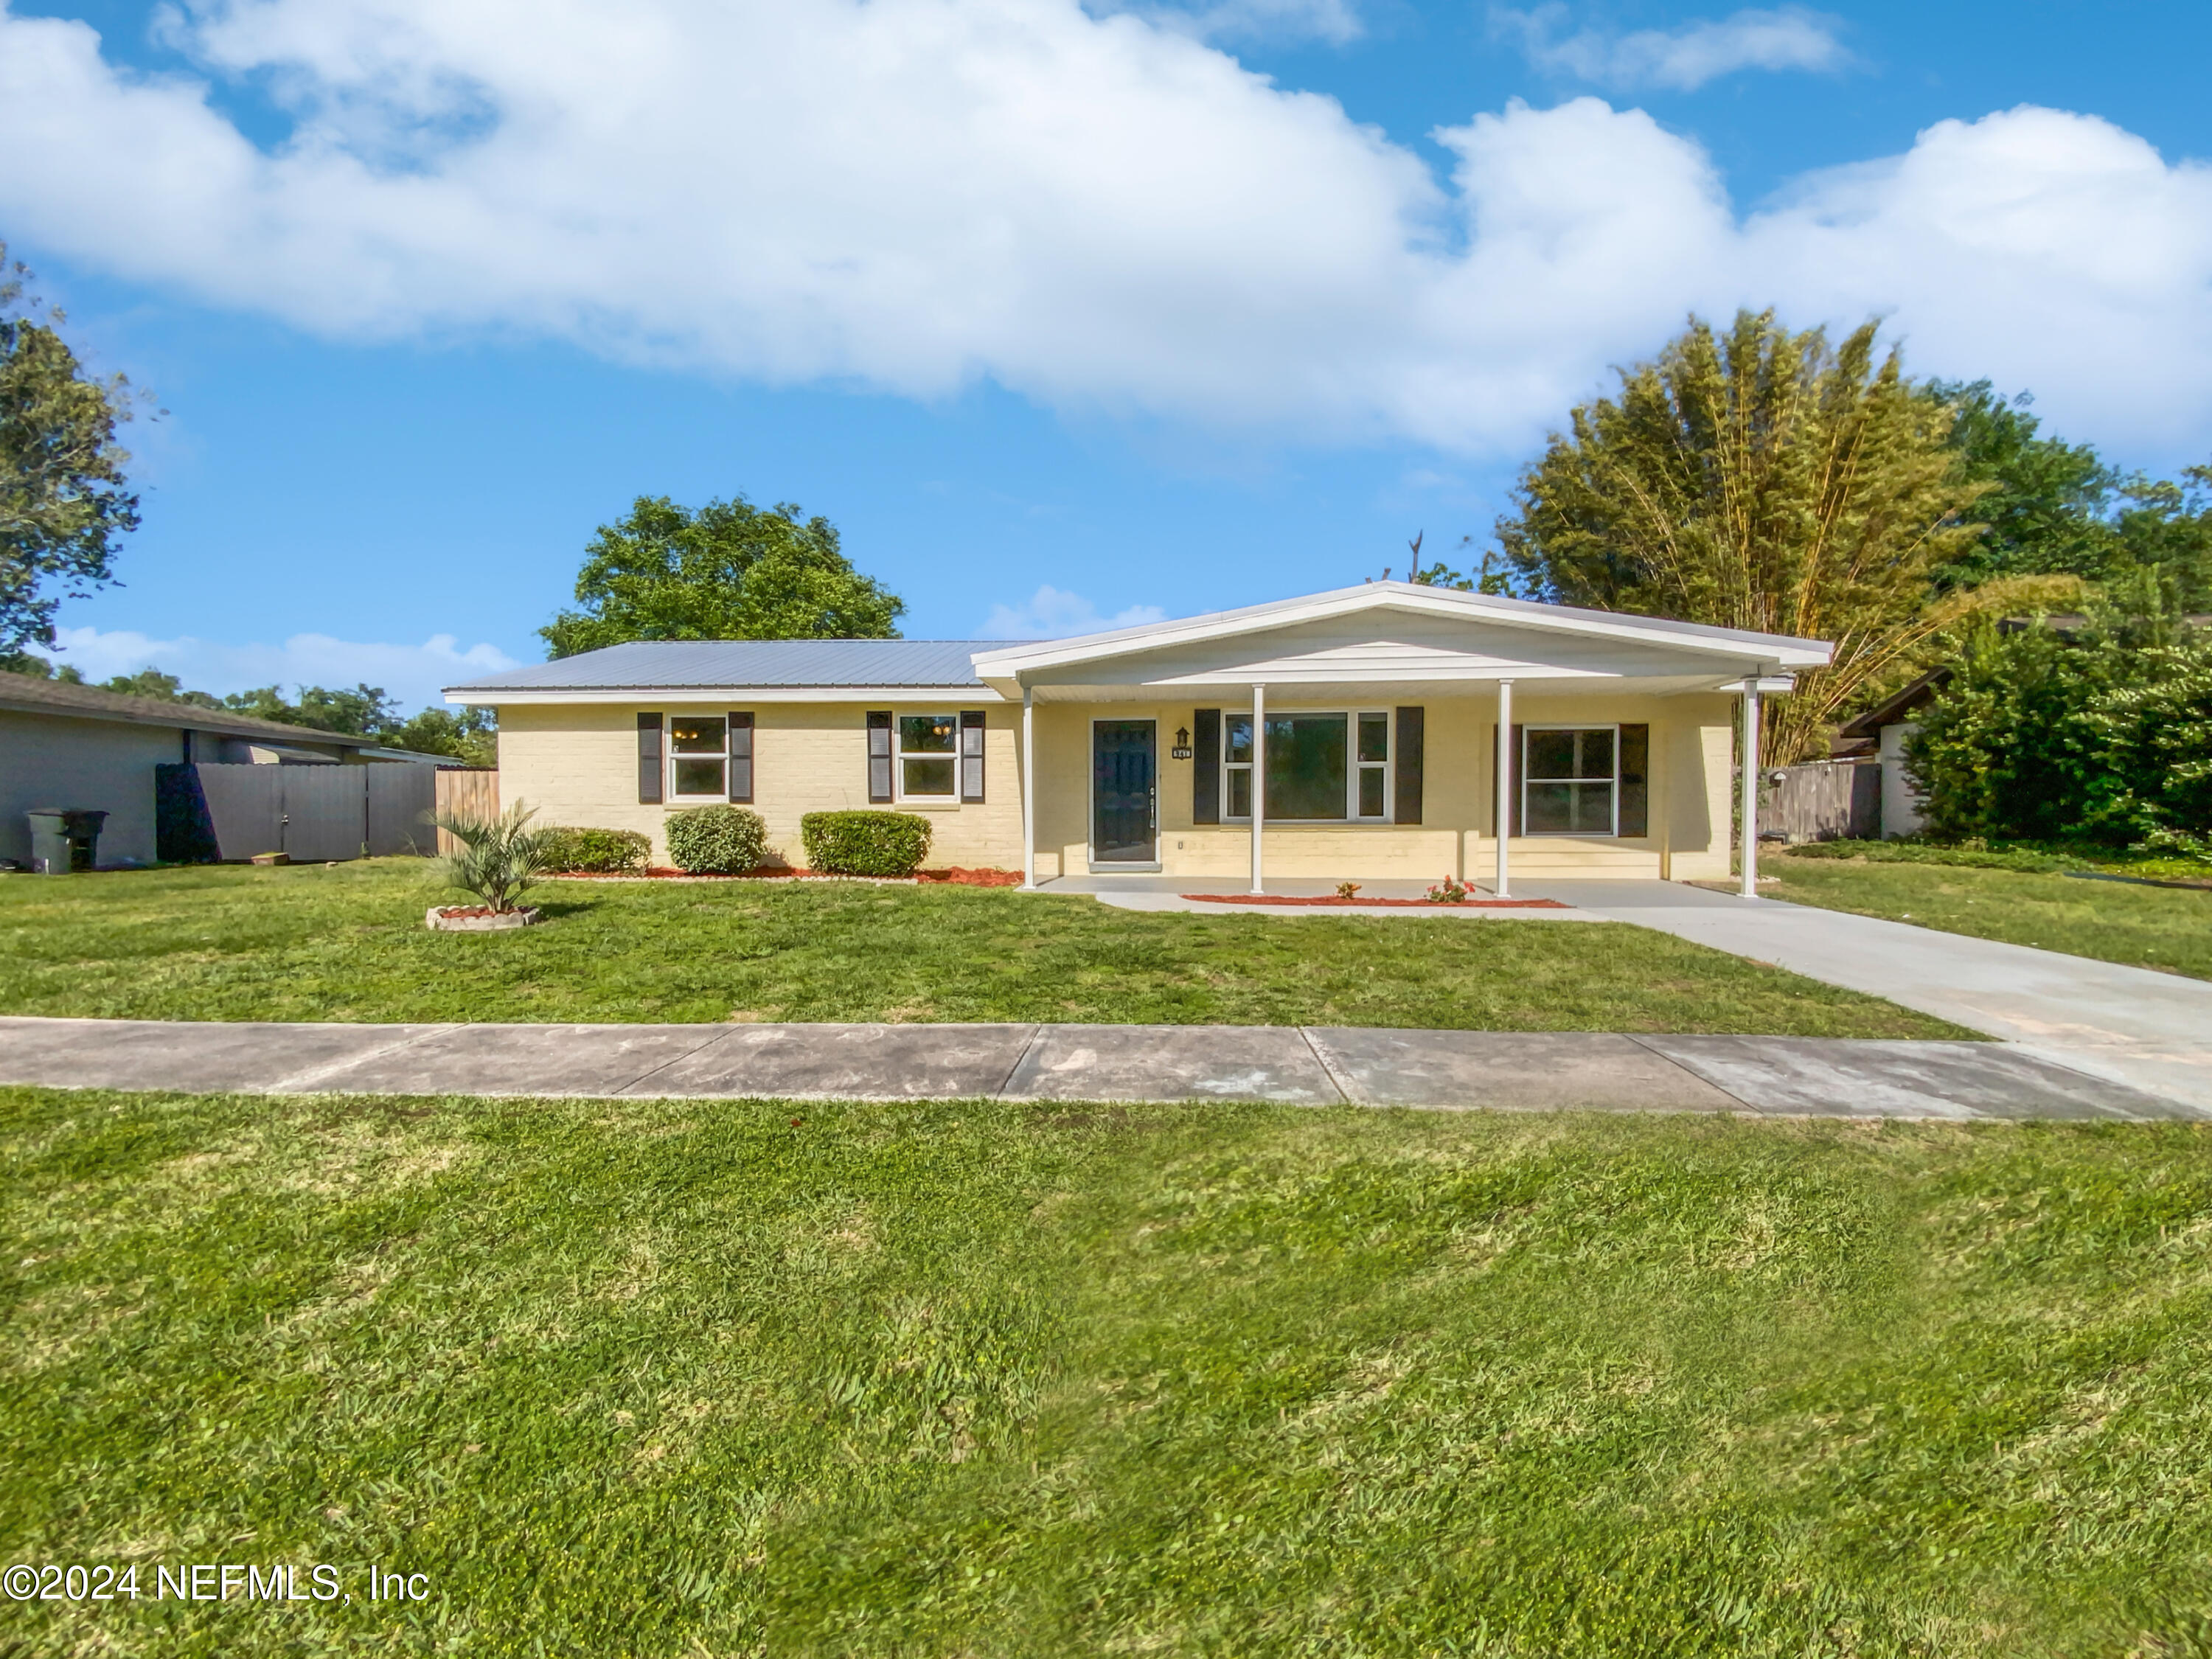 Jacksonville, FL home for sale located at 941 WINSTONIAN WAY Street, Jacksonville, FL 32221